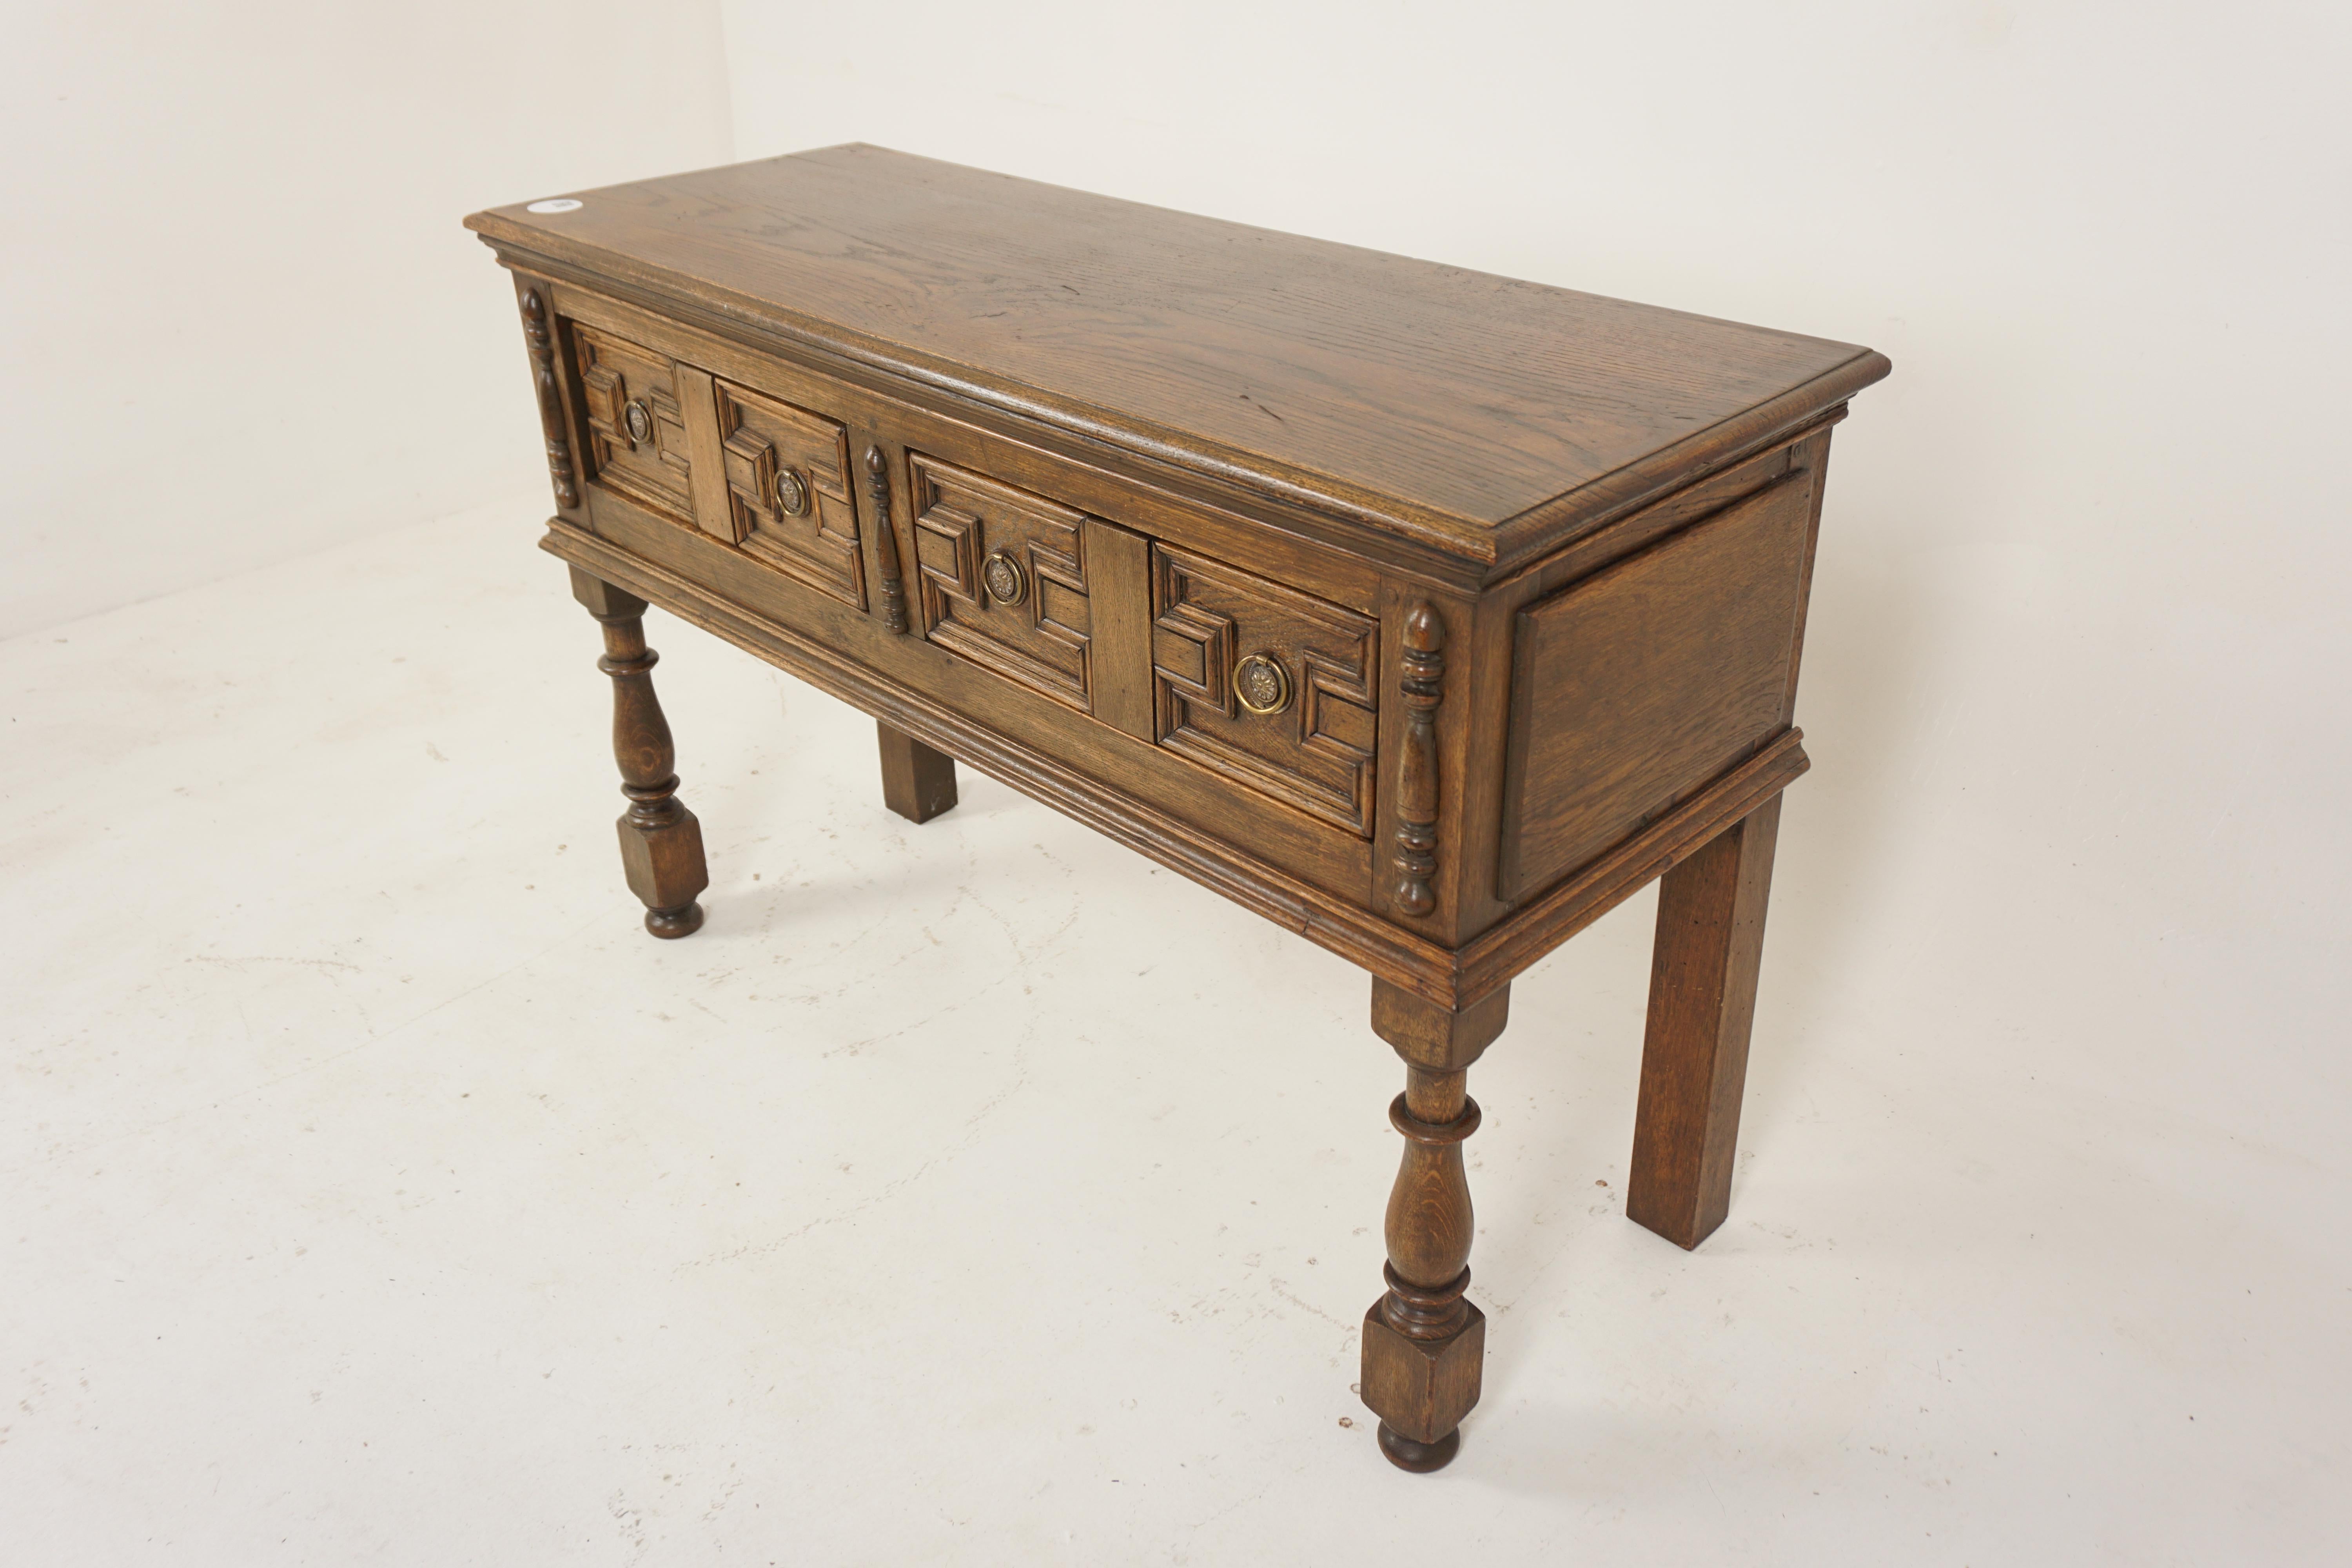 Antique carved oak sideboard, server, hall table, sofa table, Scotland 1910, H690

Scotland 1910
Solid Oak
Original Finish
Rectangular moulded top
Above a pair of geometric moulded drawers
Original brass pulls
Standing on turned front legs and flat